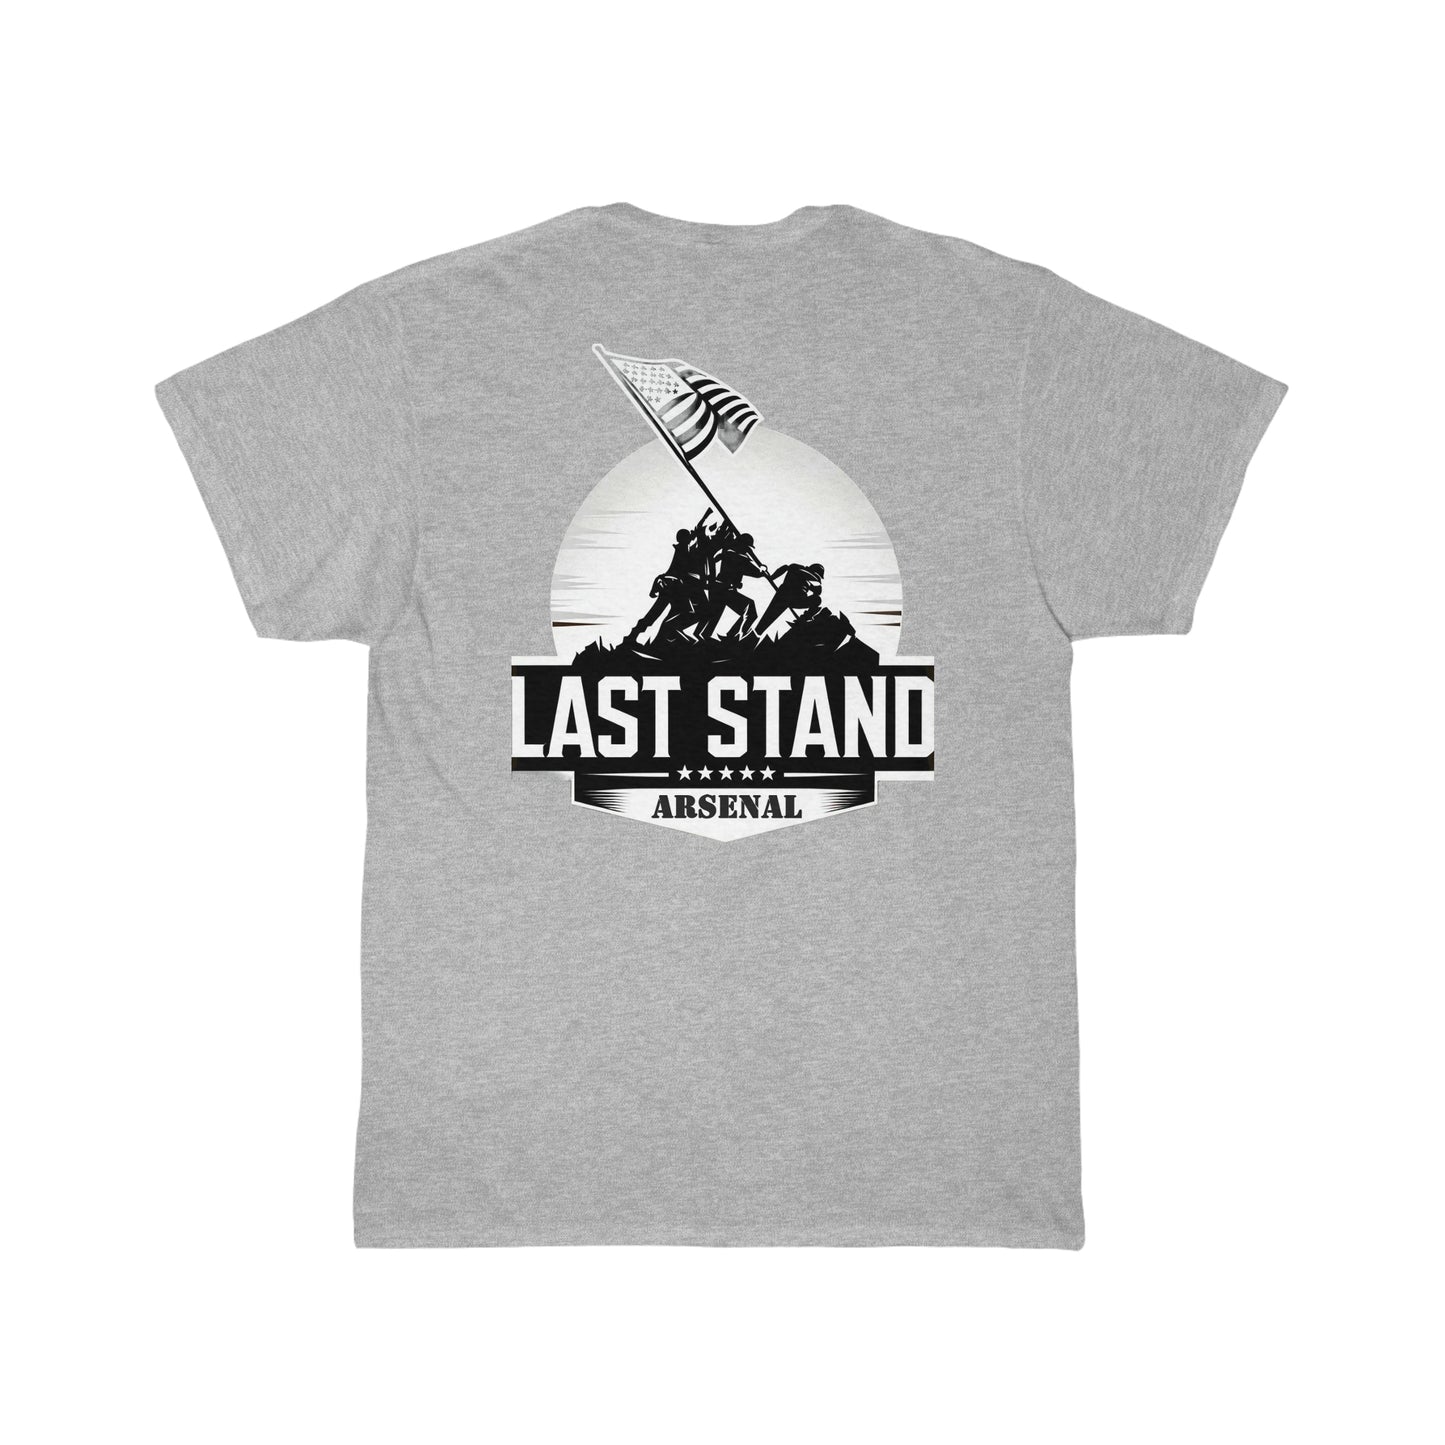 Last Stand Arsenal - All Together (Black and White design) Tee